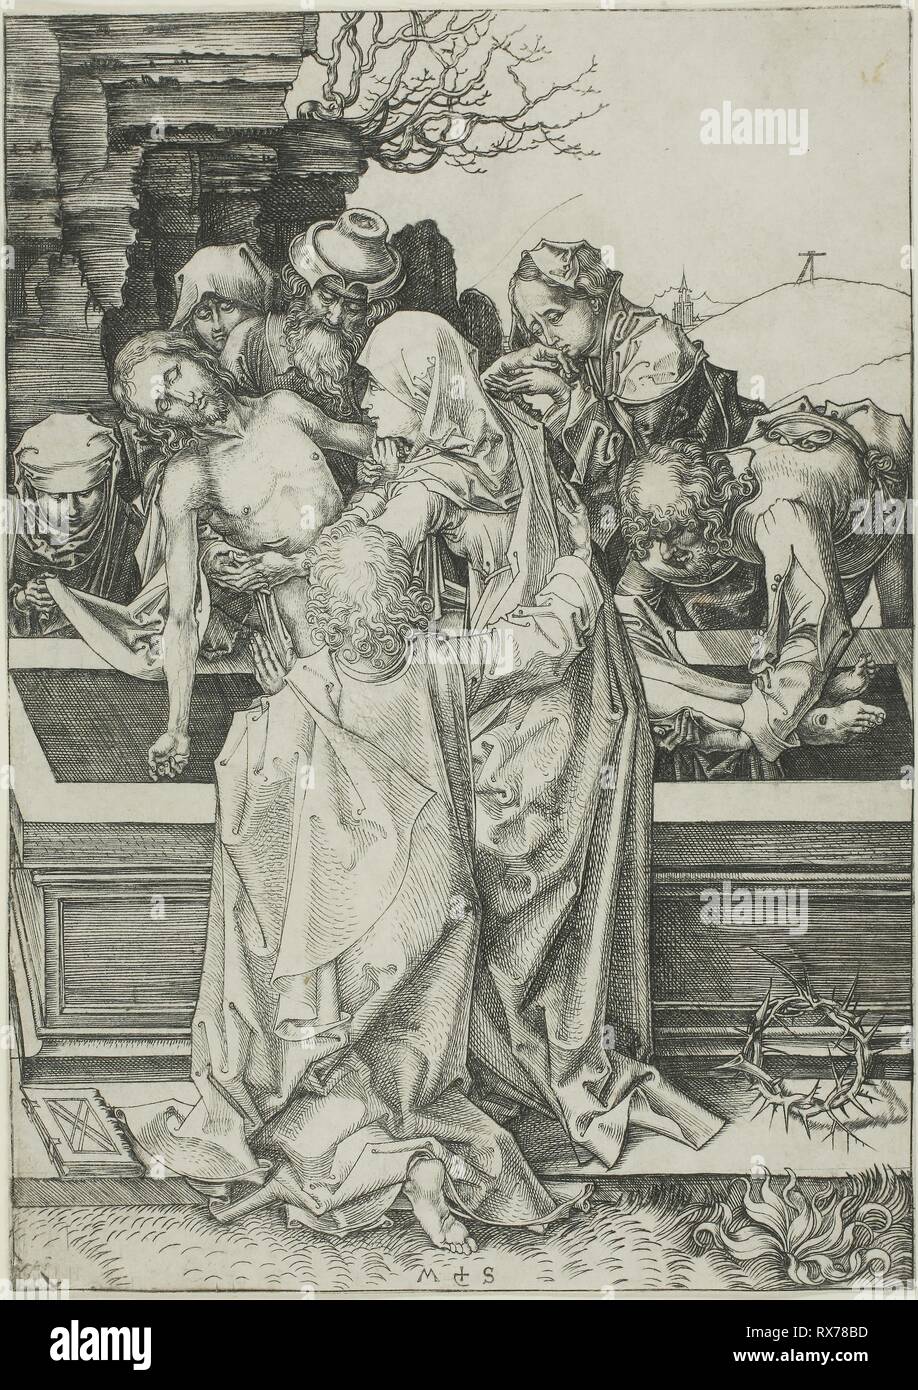 The Entombment, from The Passion. Martin Schongauer; German, c. 1450-1491. Date: 1475-1486. Dimensions: 163 x 115 mm (sheet trimmed within plate mark). Engraving on paper. Origin: Germany. Museum: The Chicago Art Institute. Stock Photo